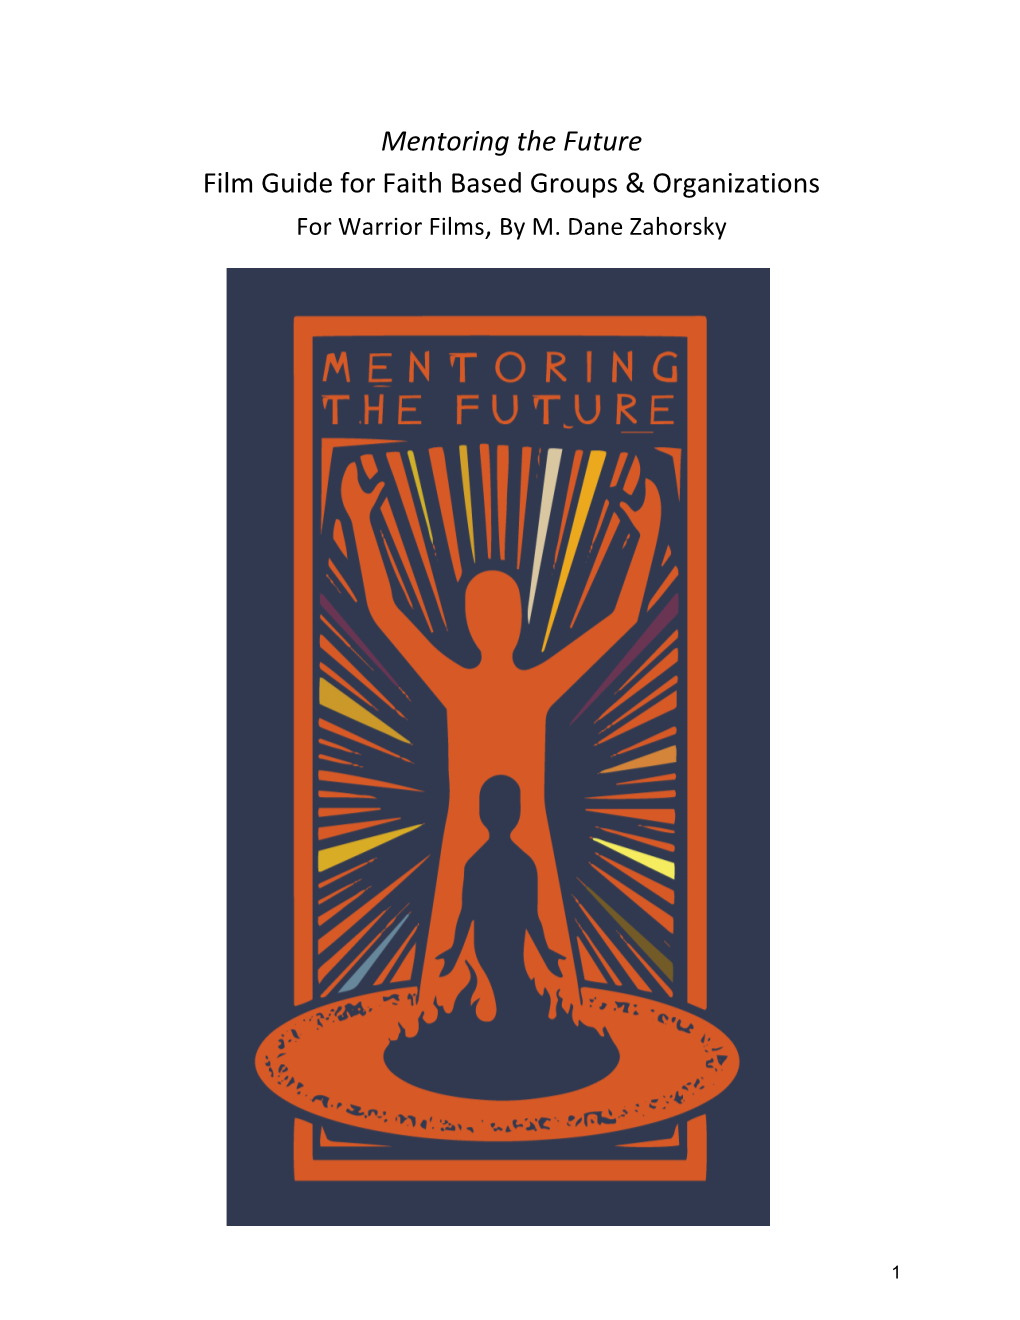 Mentoring the Future Film Guide for Faith Based Groups & Organizations